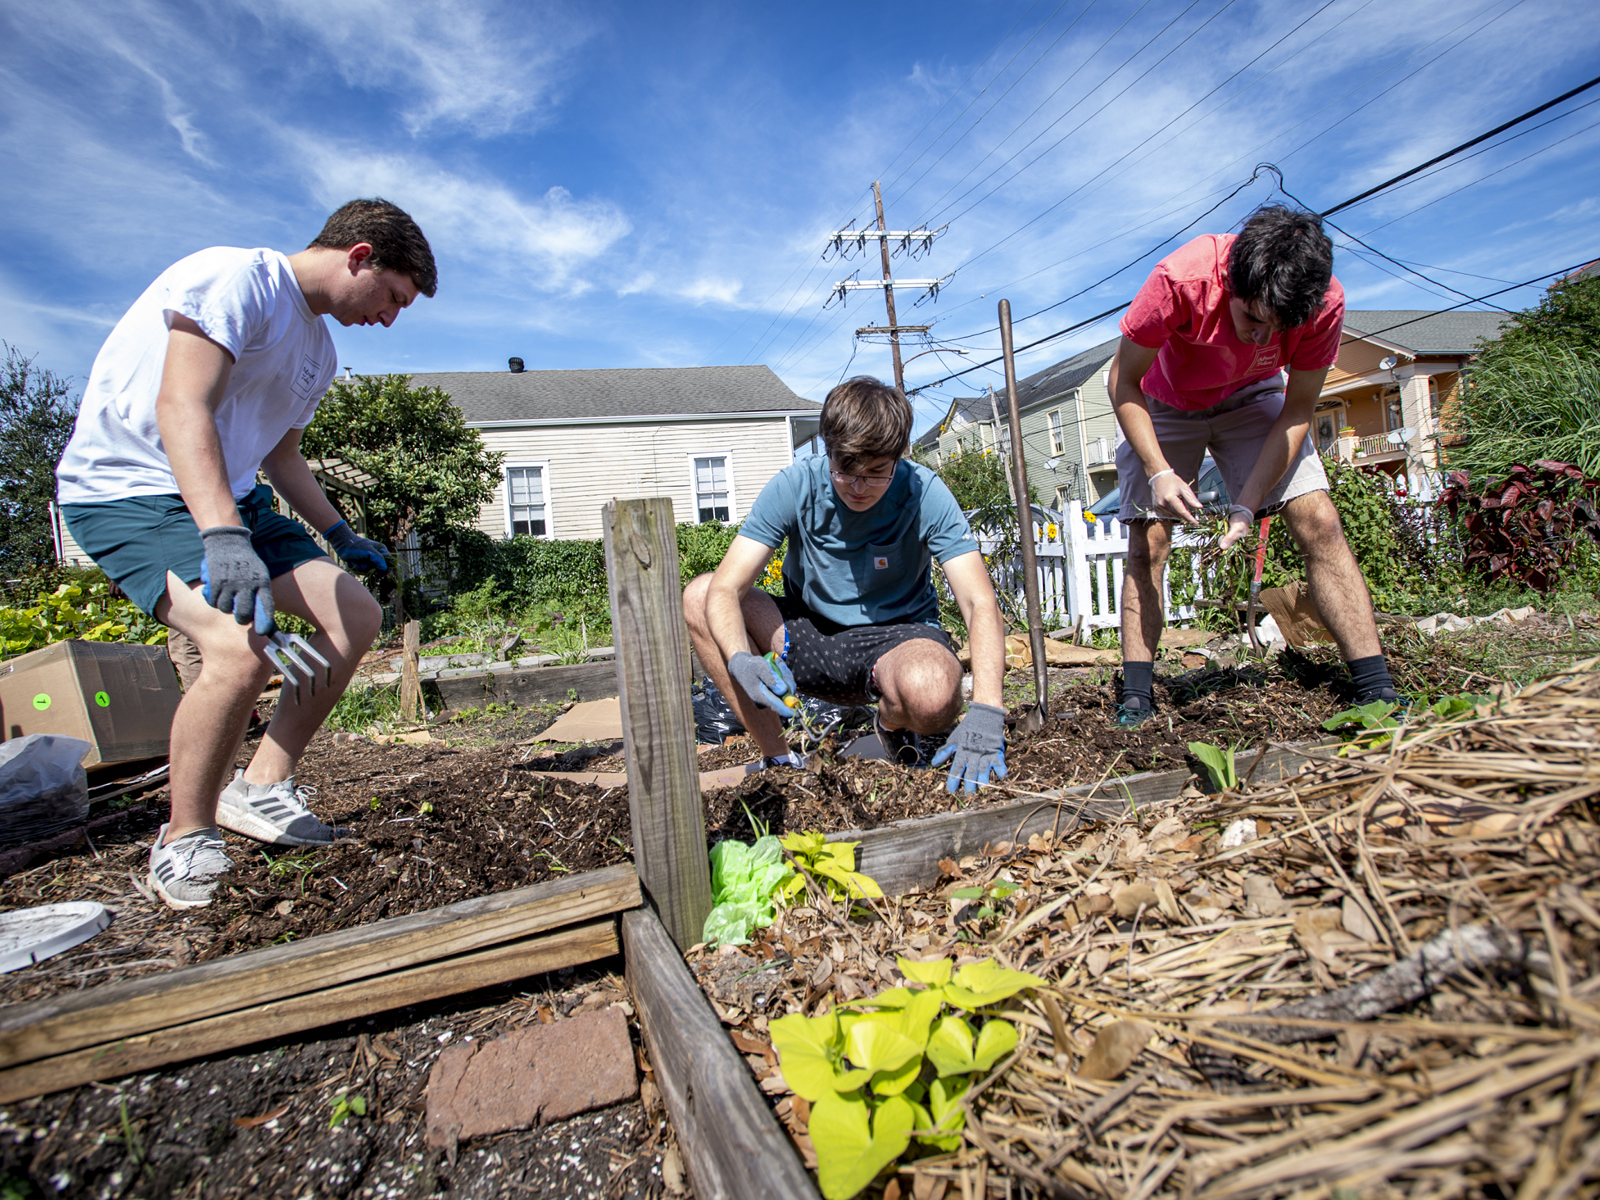 Daniel Marglous, Andrew Terrebonne and John Nuttli, left to right, weed and freshen up a path in the community garden at Hargar’s House NOLA. The garden is filled with herbs for cooking and making medicinal teas.